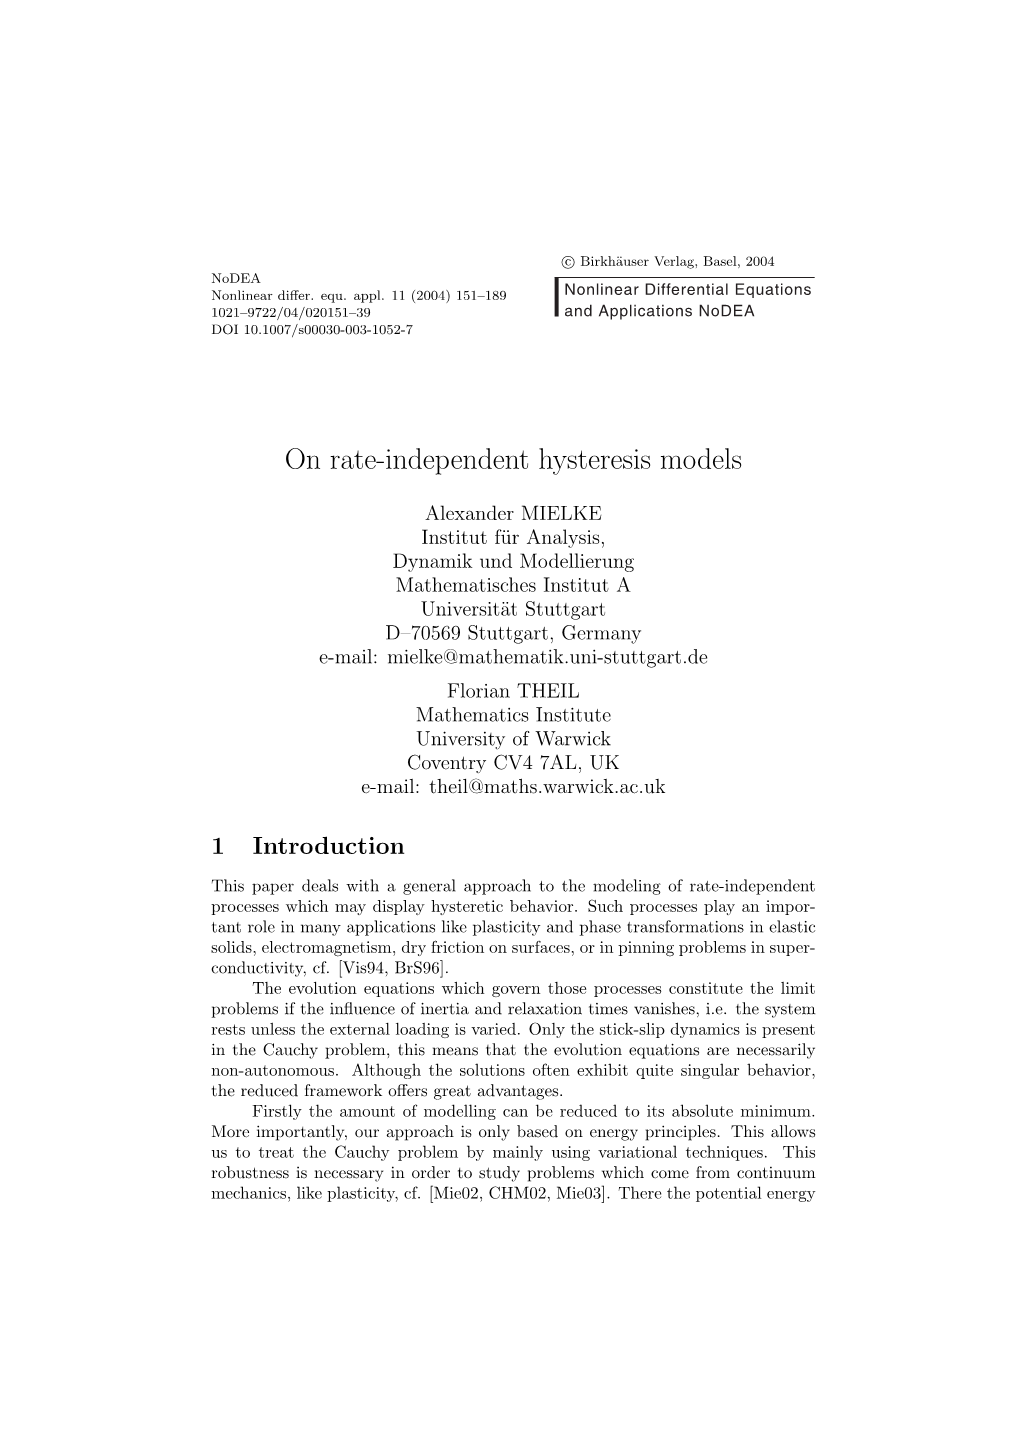 On Rate-Independent Hysteresis Models